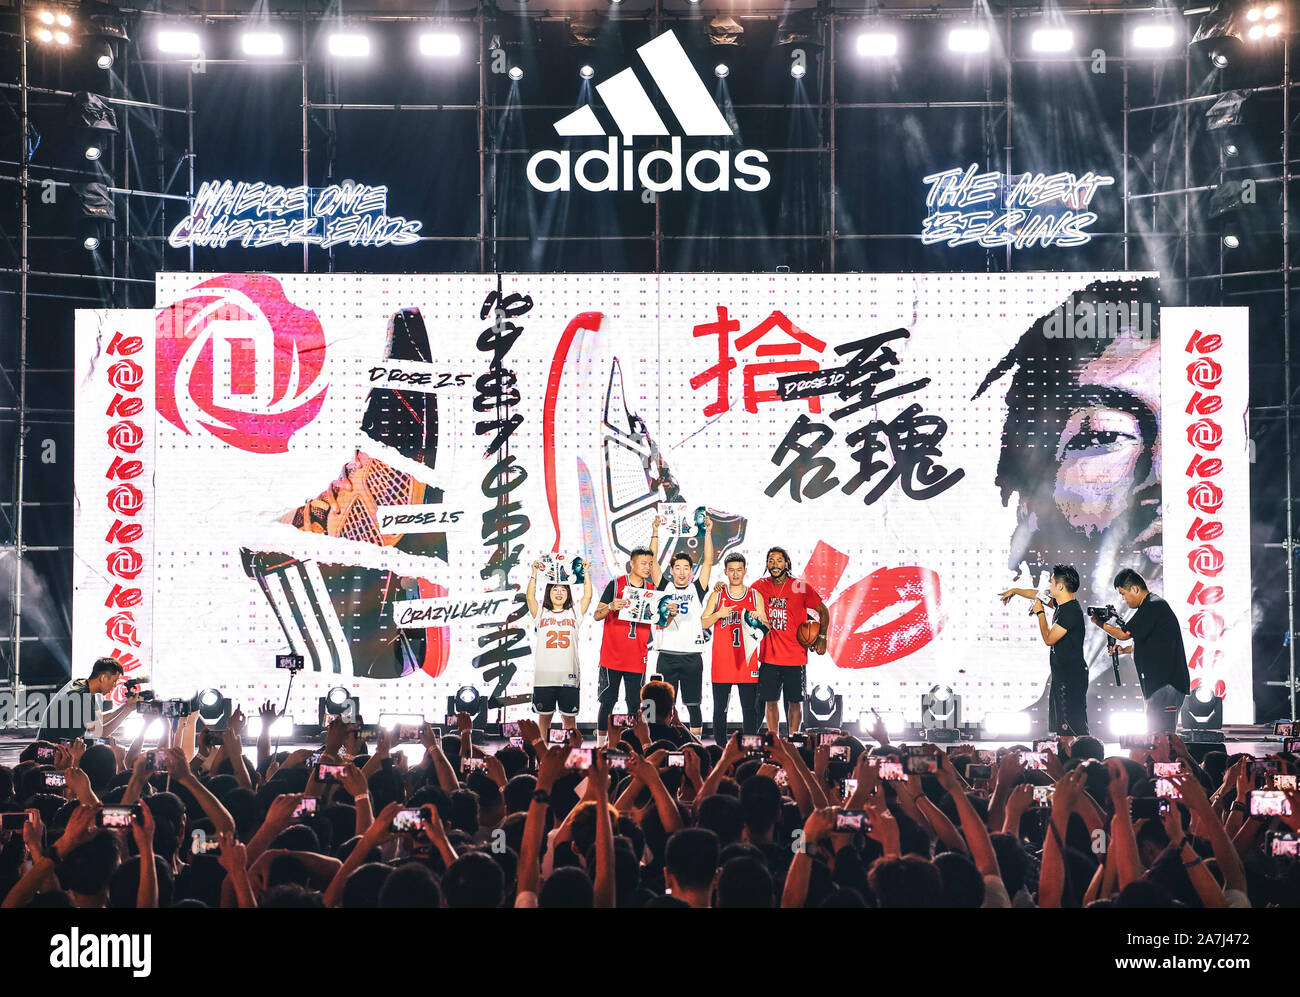 American professional basketball player Derrick Rose, right, shows up at an  Adidas promotional event and celebrates Mid-Autumn Festival with local fan  Stock Photo - Alamy